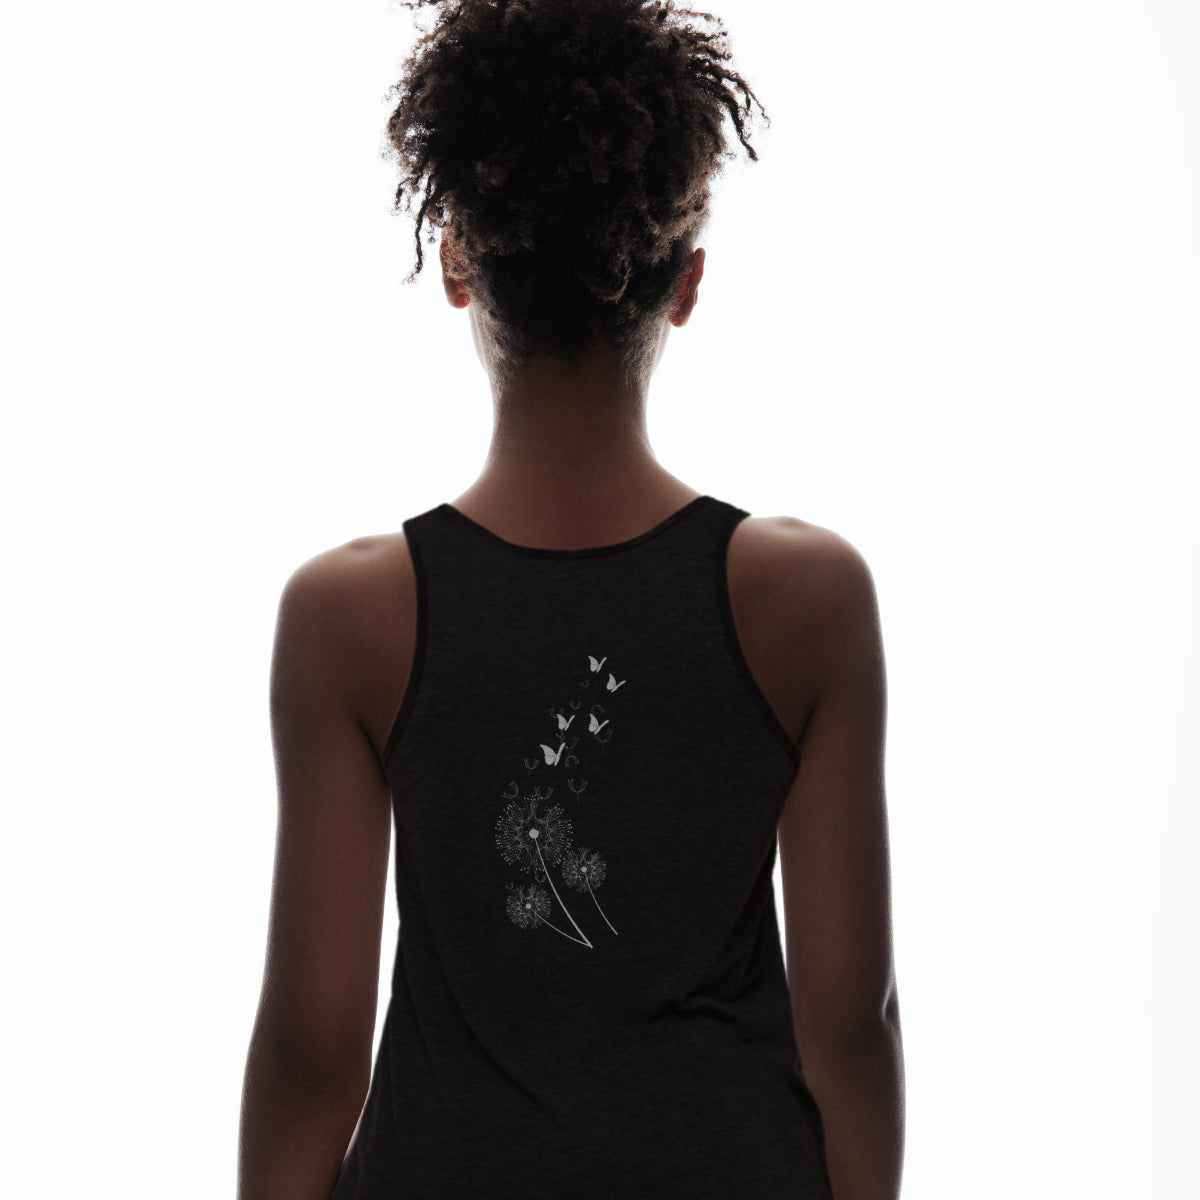 Wind at your back - Unisex Jersey Tank